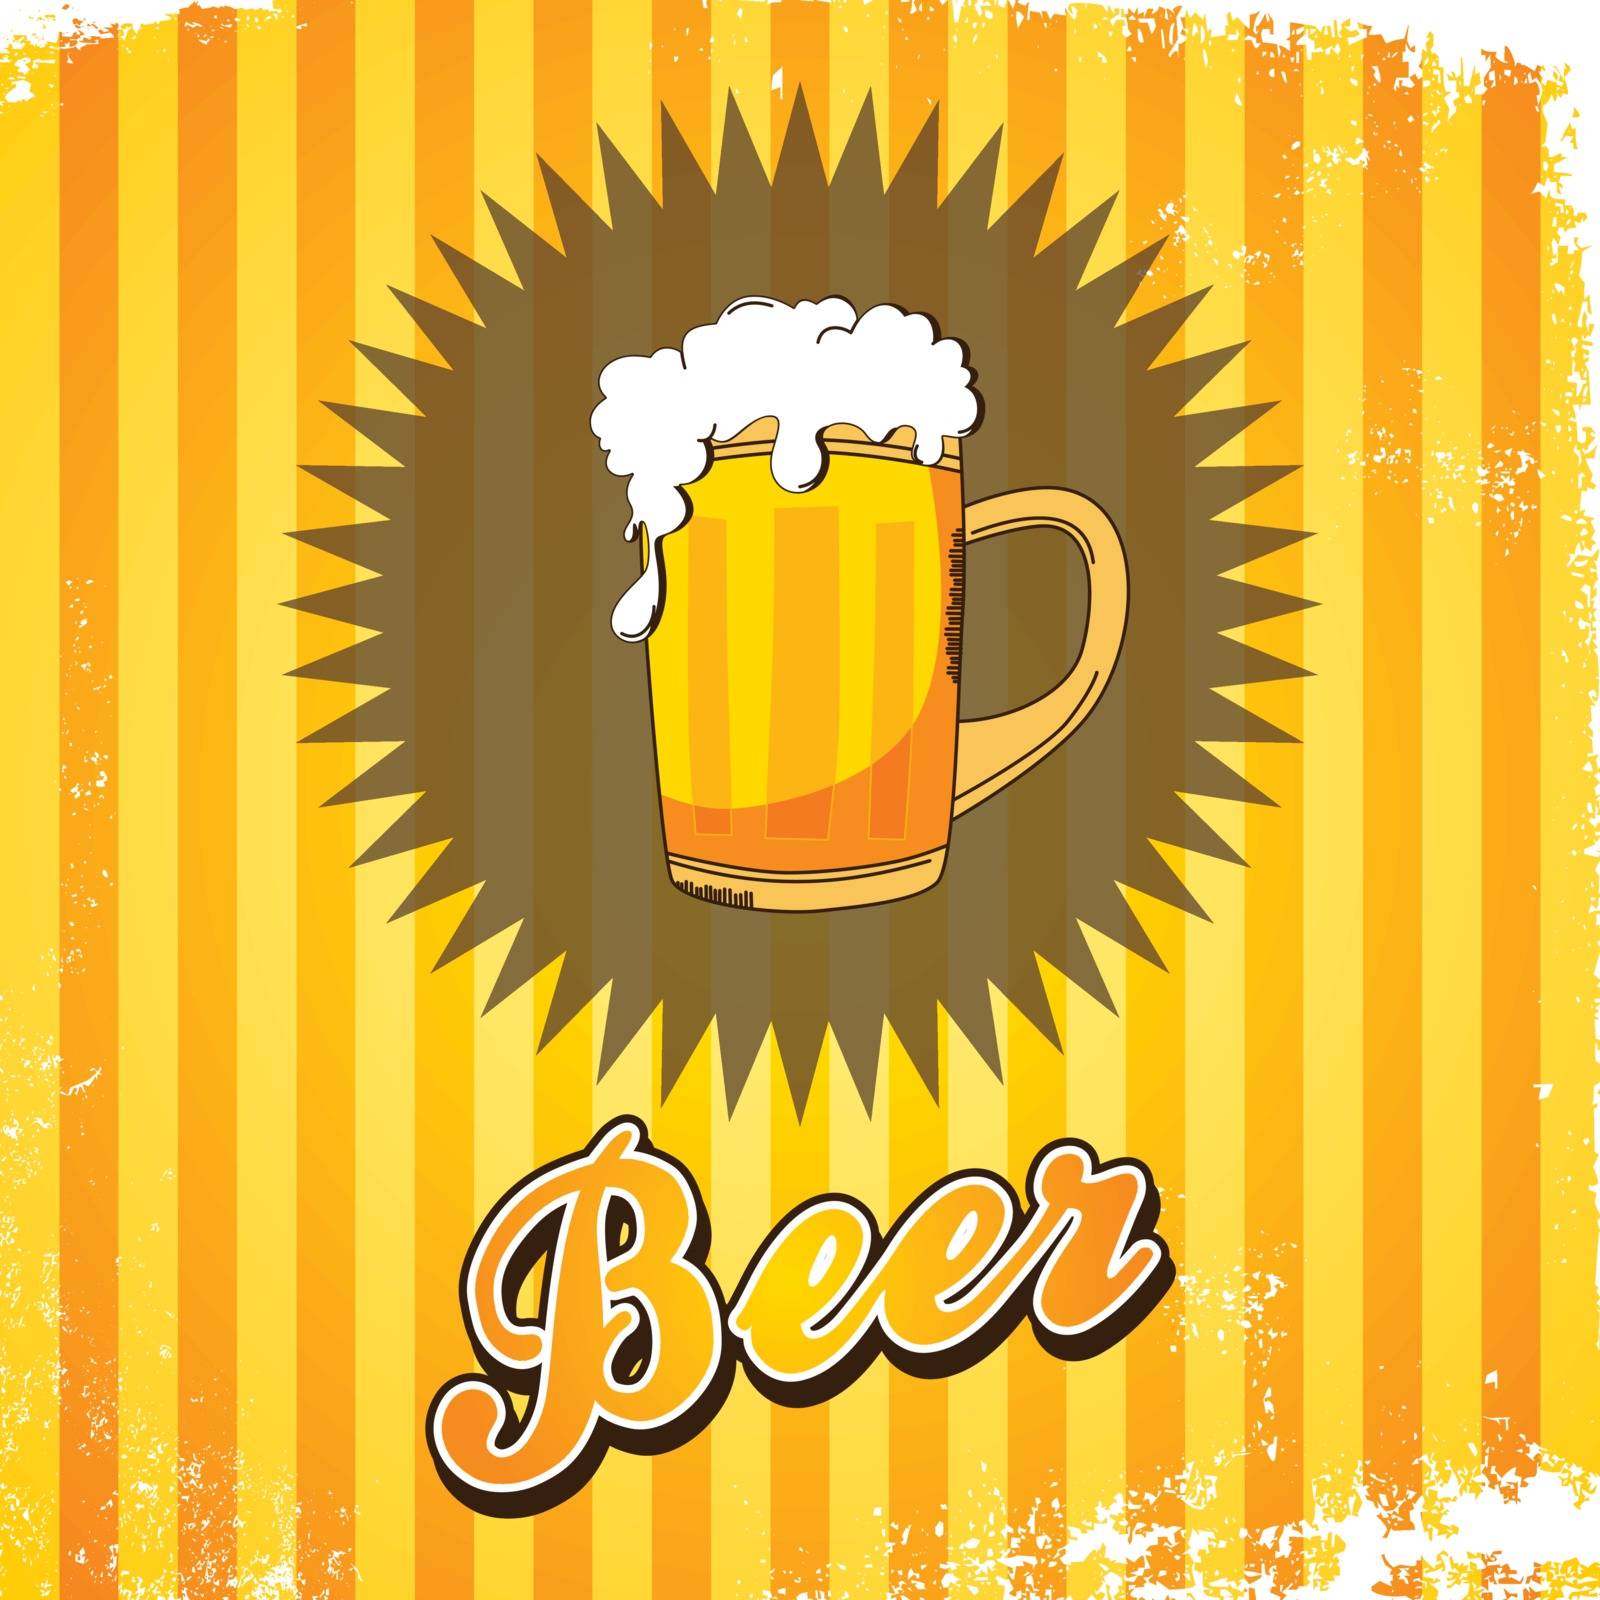 cold beer theme graphic art vector illustration